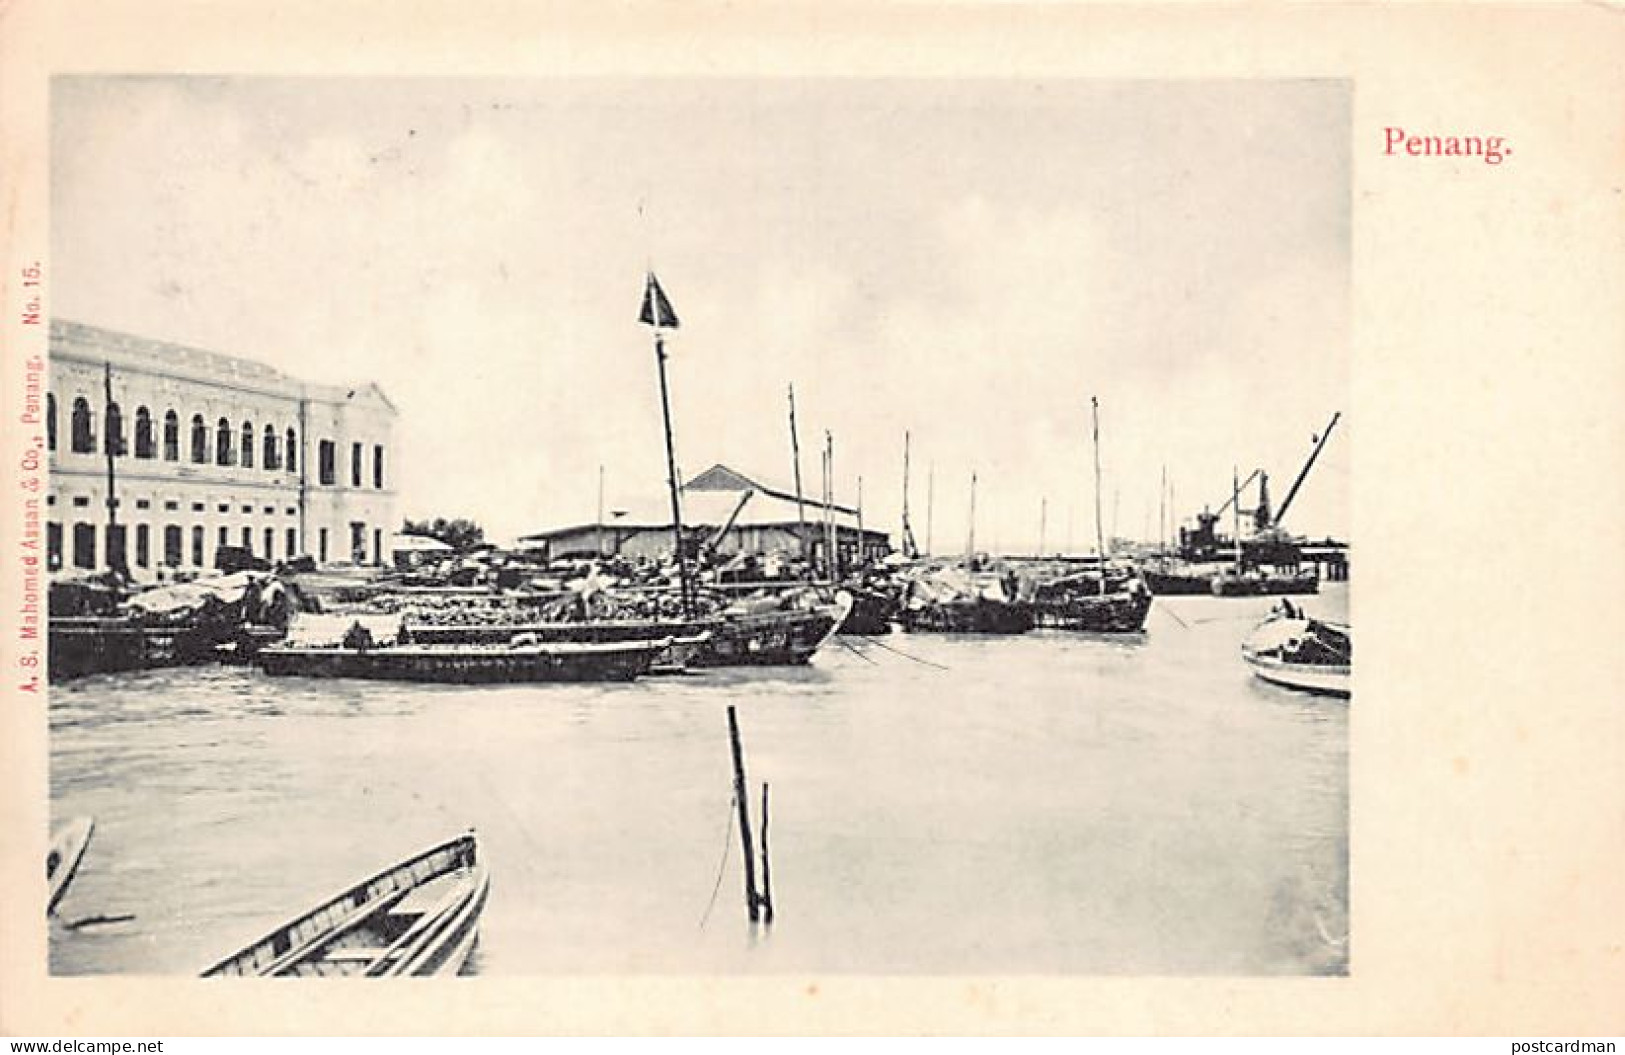 Malaysia - PENANG - The Harbour - Publ. A. S. Mahomed Assan & Co. 15 - Malesia